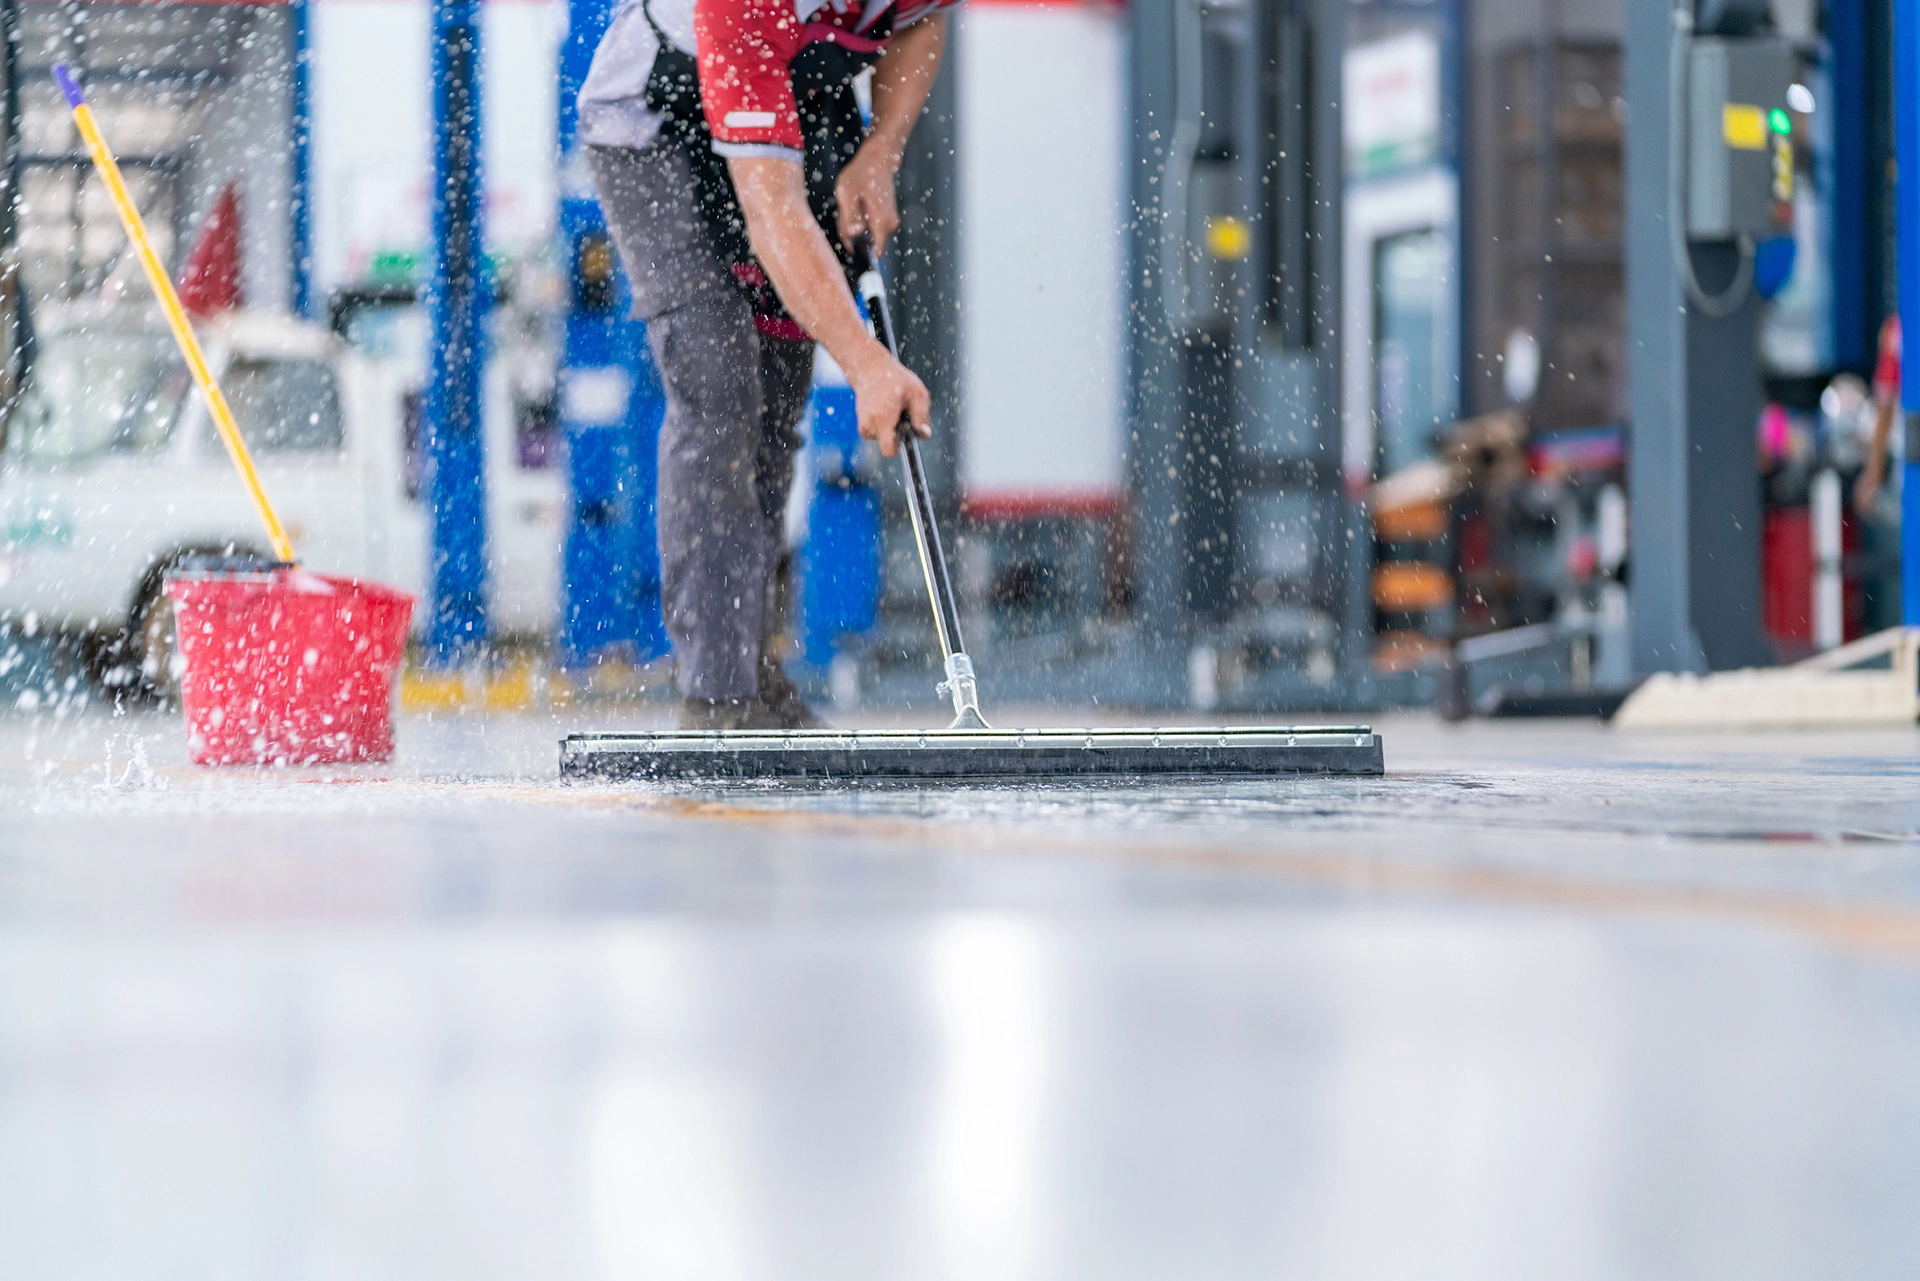 How to Clean Garage Floor Without Pressure Washer?